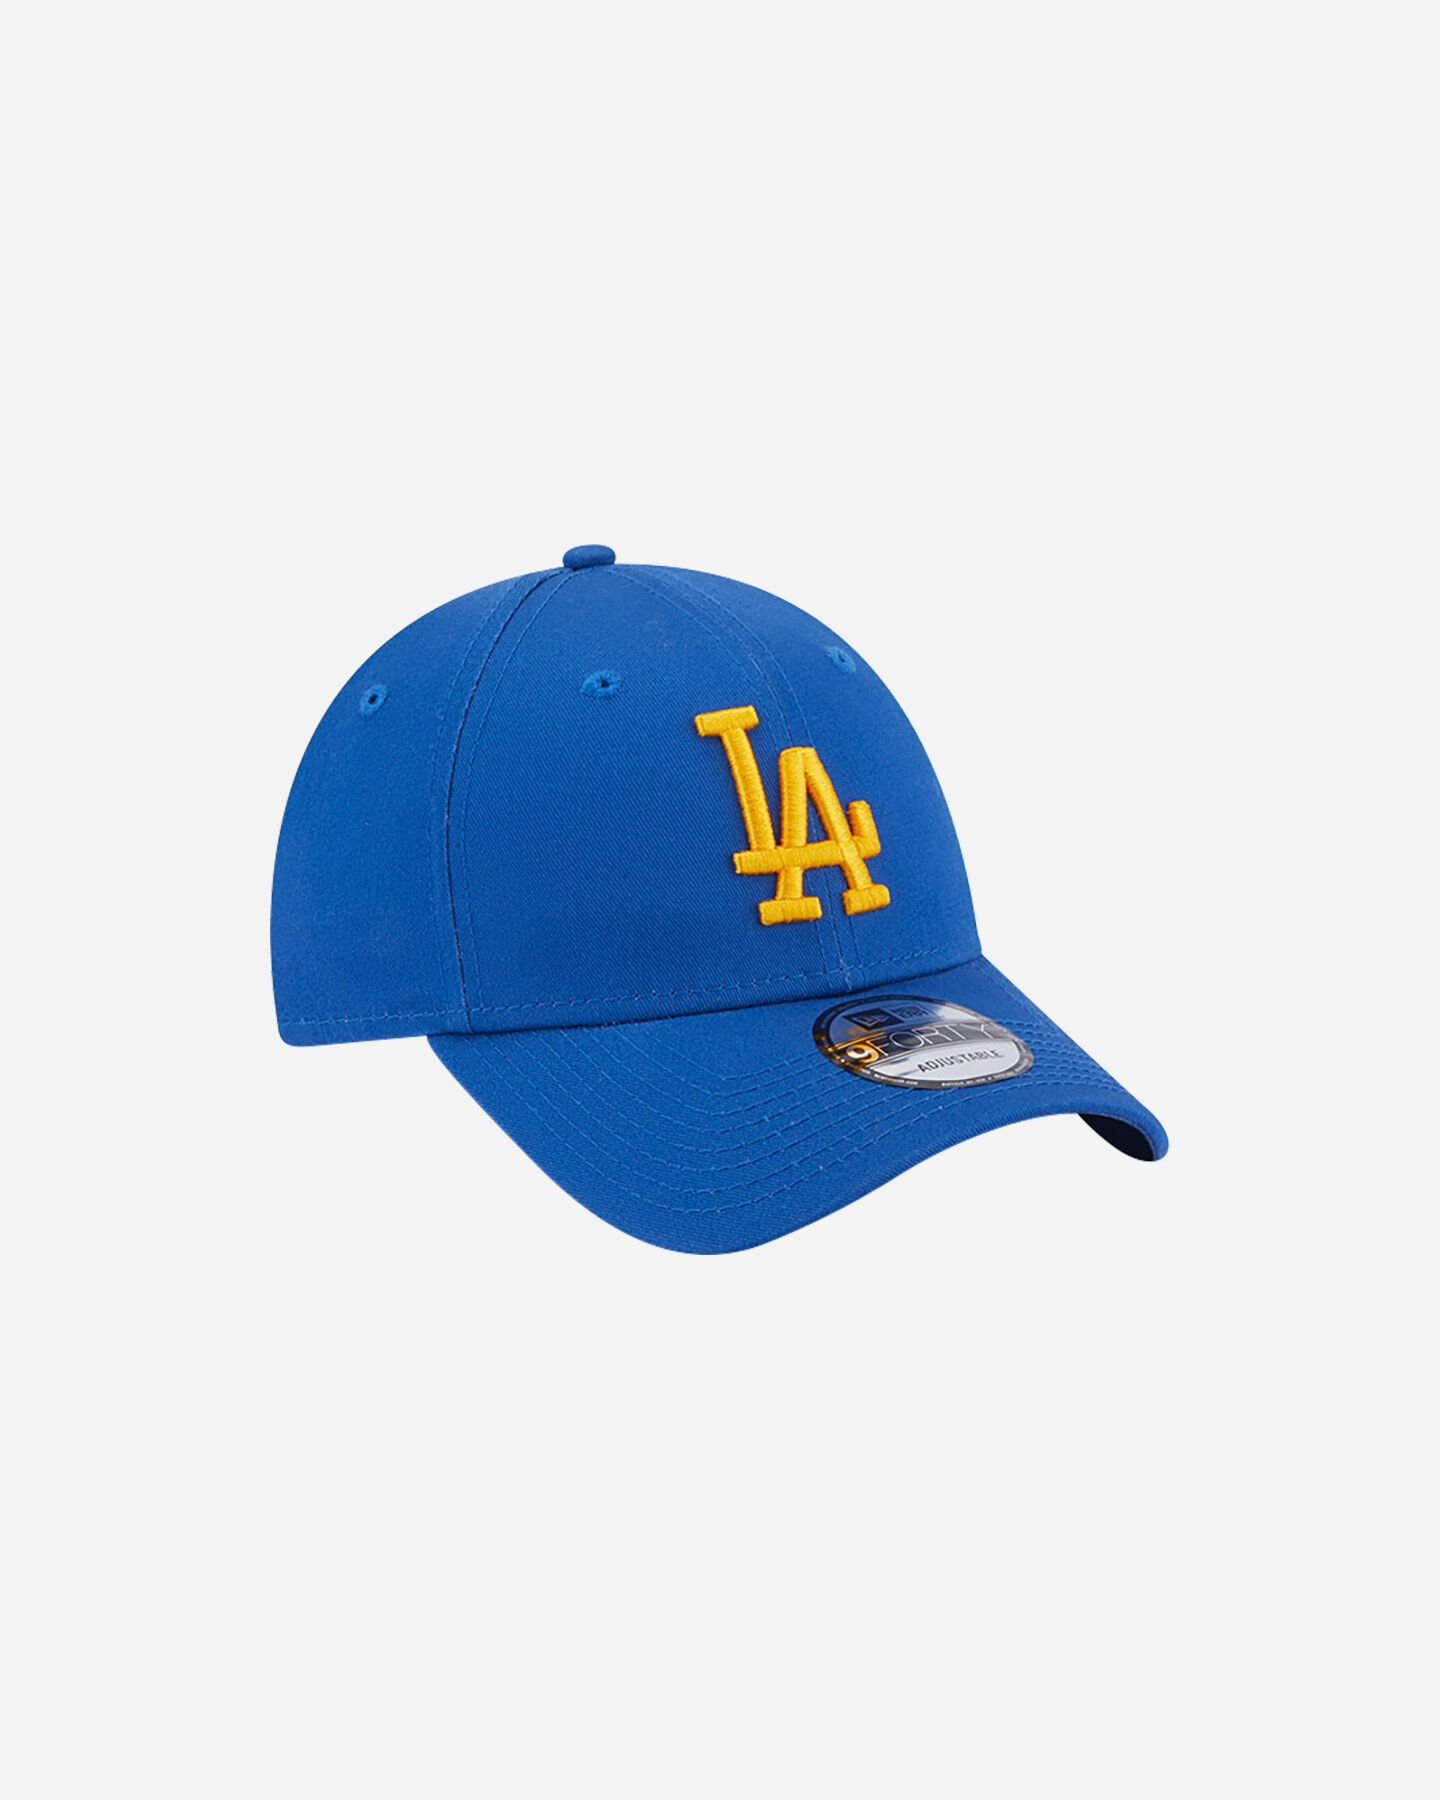  Cappellino NEW ERA 9FORTY MLB LEAGUE LOS ANGELES DODGERS  S5606281|420|OSFM scatto 2